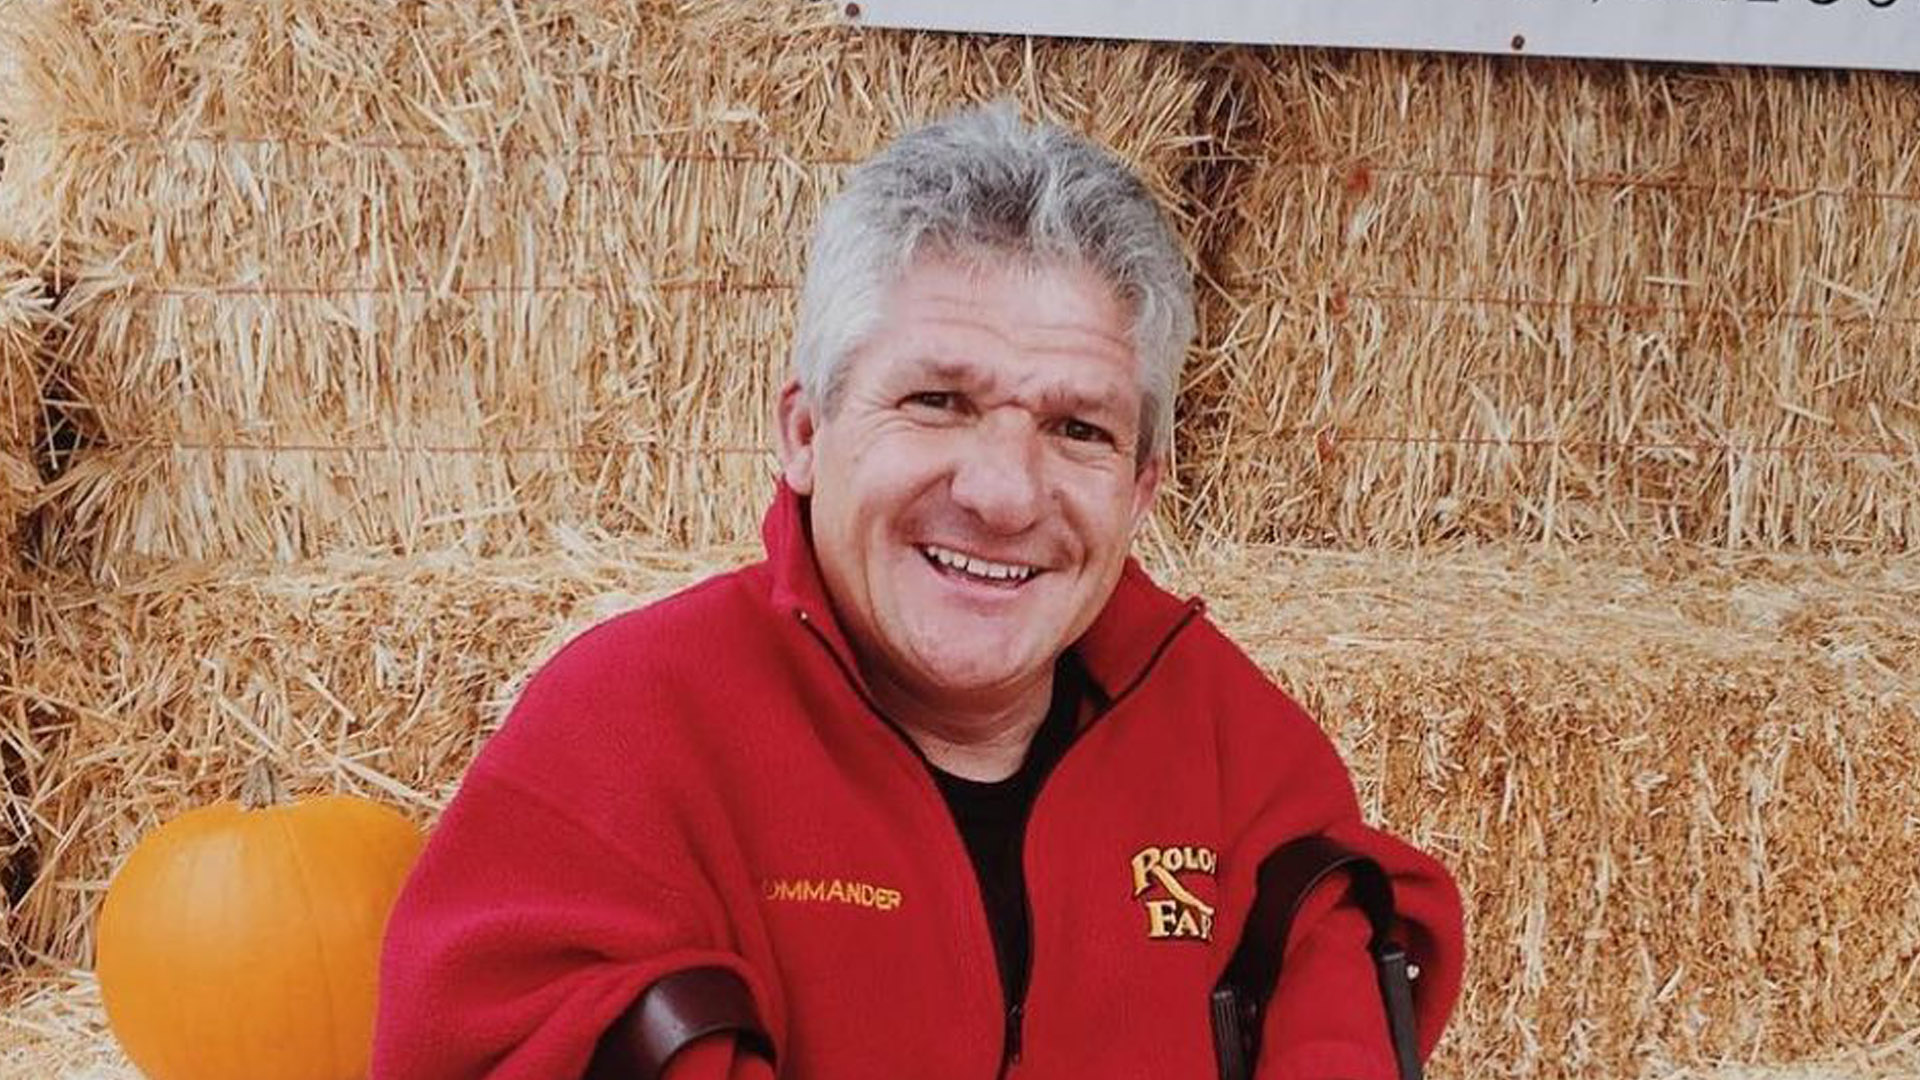 Little People’s Matt Roloff shows off major addition to his $4M farm after being snubbed by son Zach